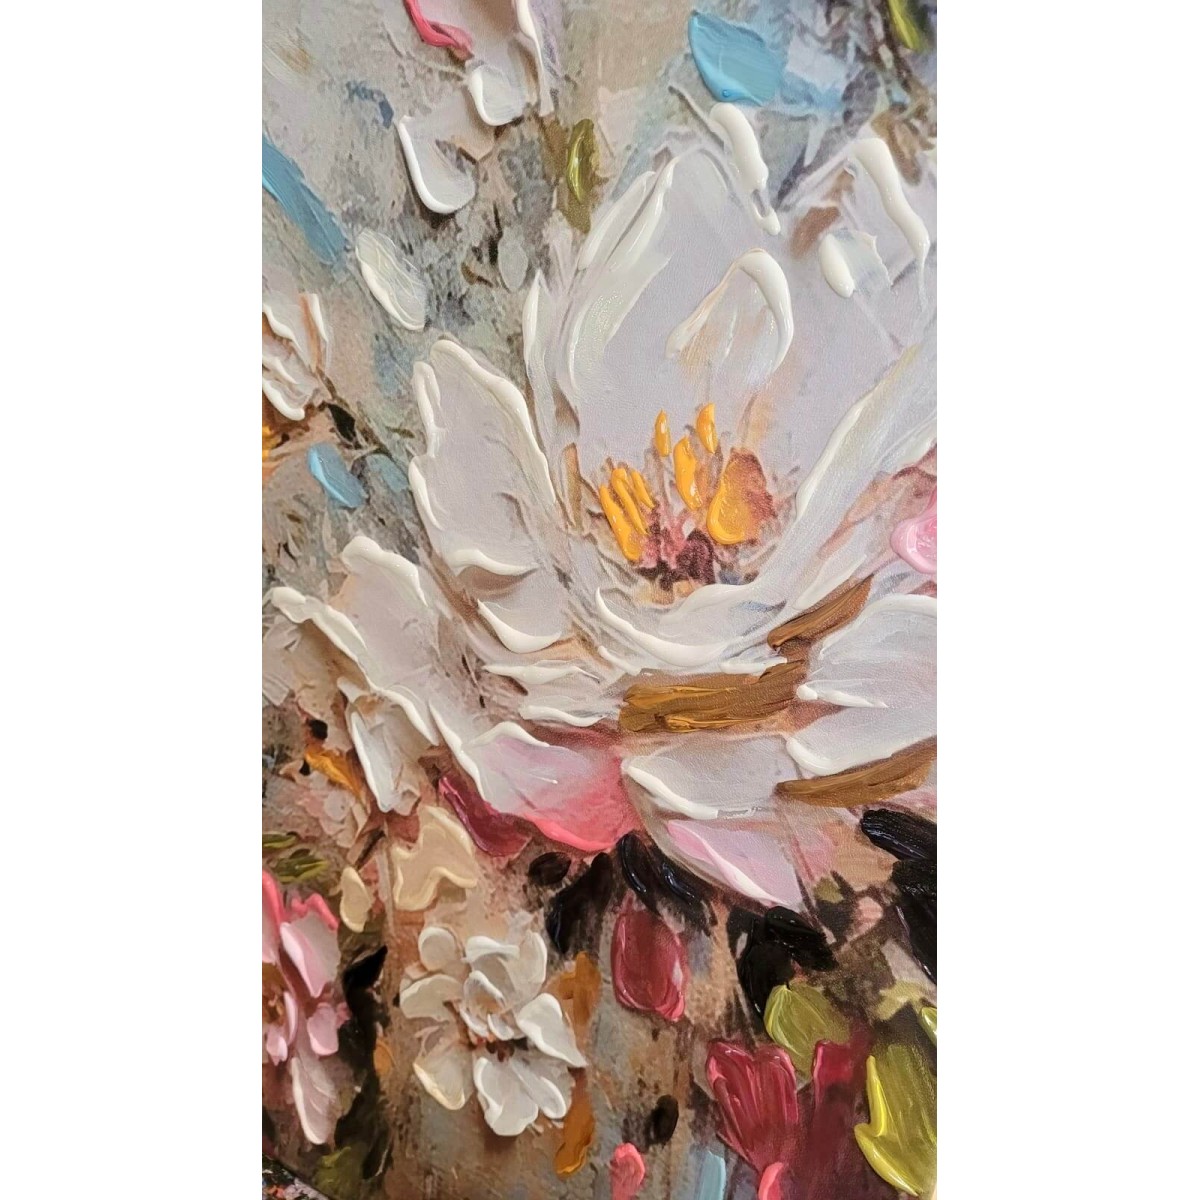 Flowers with Colorful Leaves III 3d Heavy Textured Partial Oil Painting